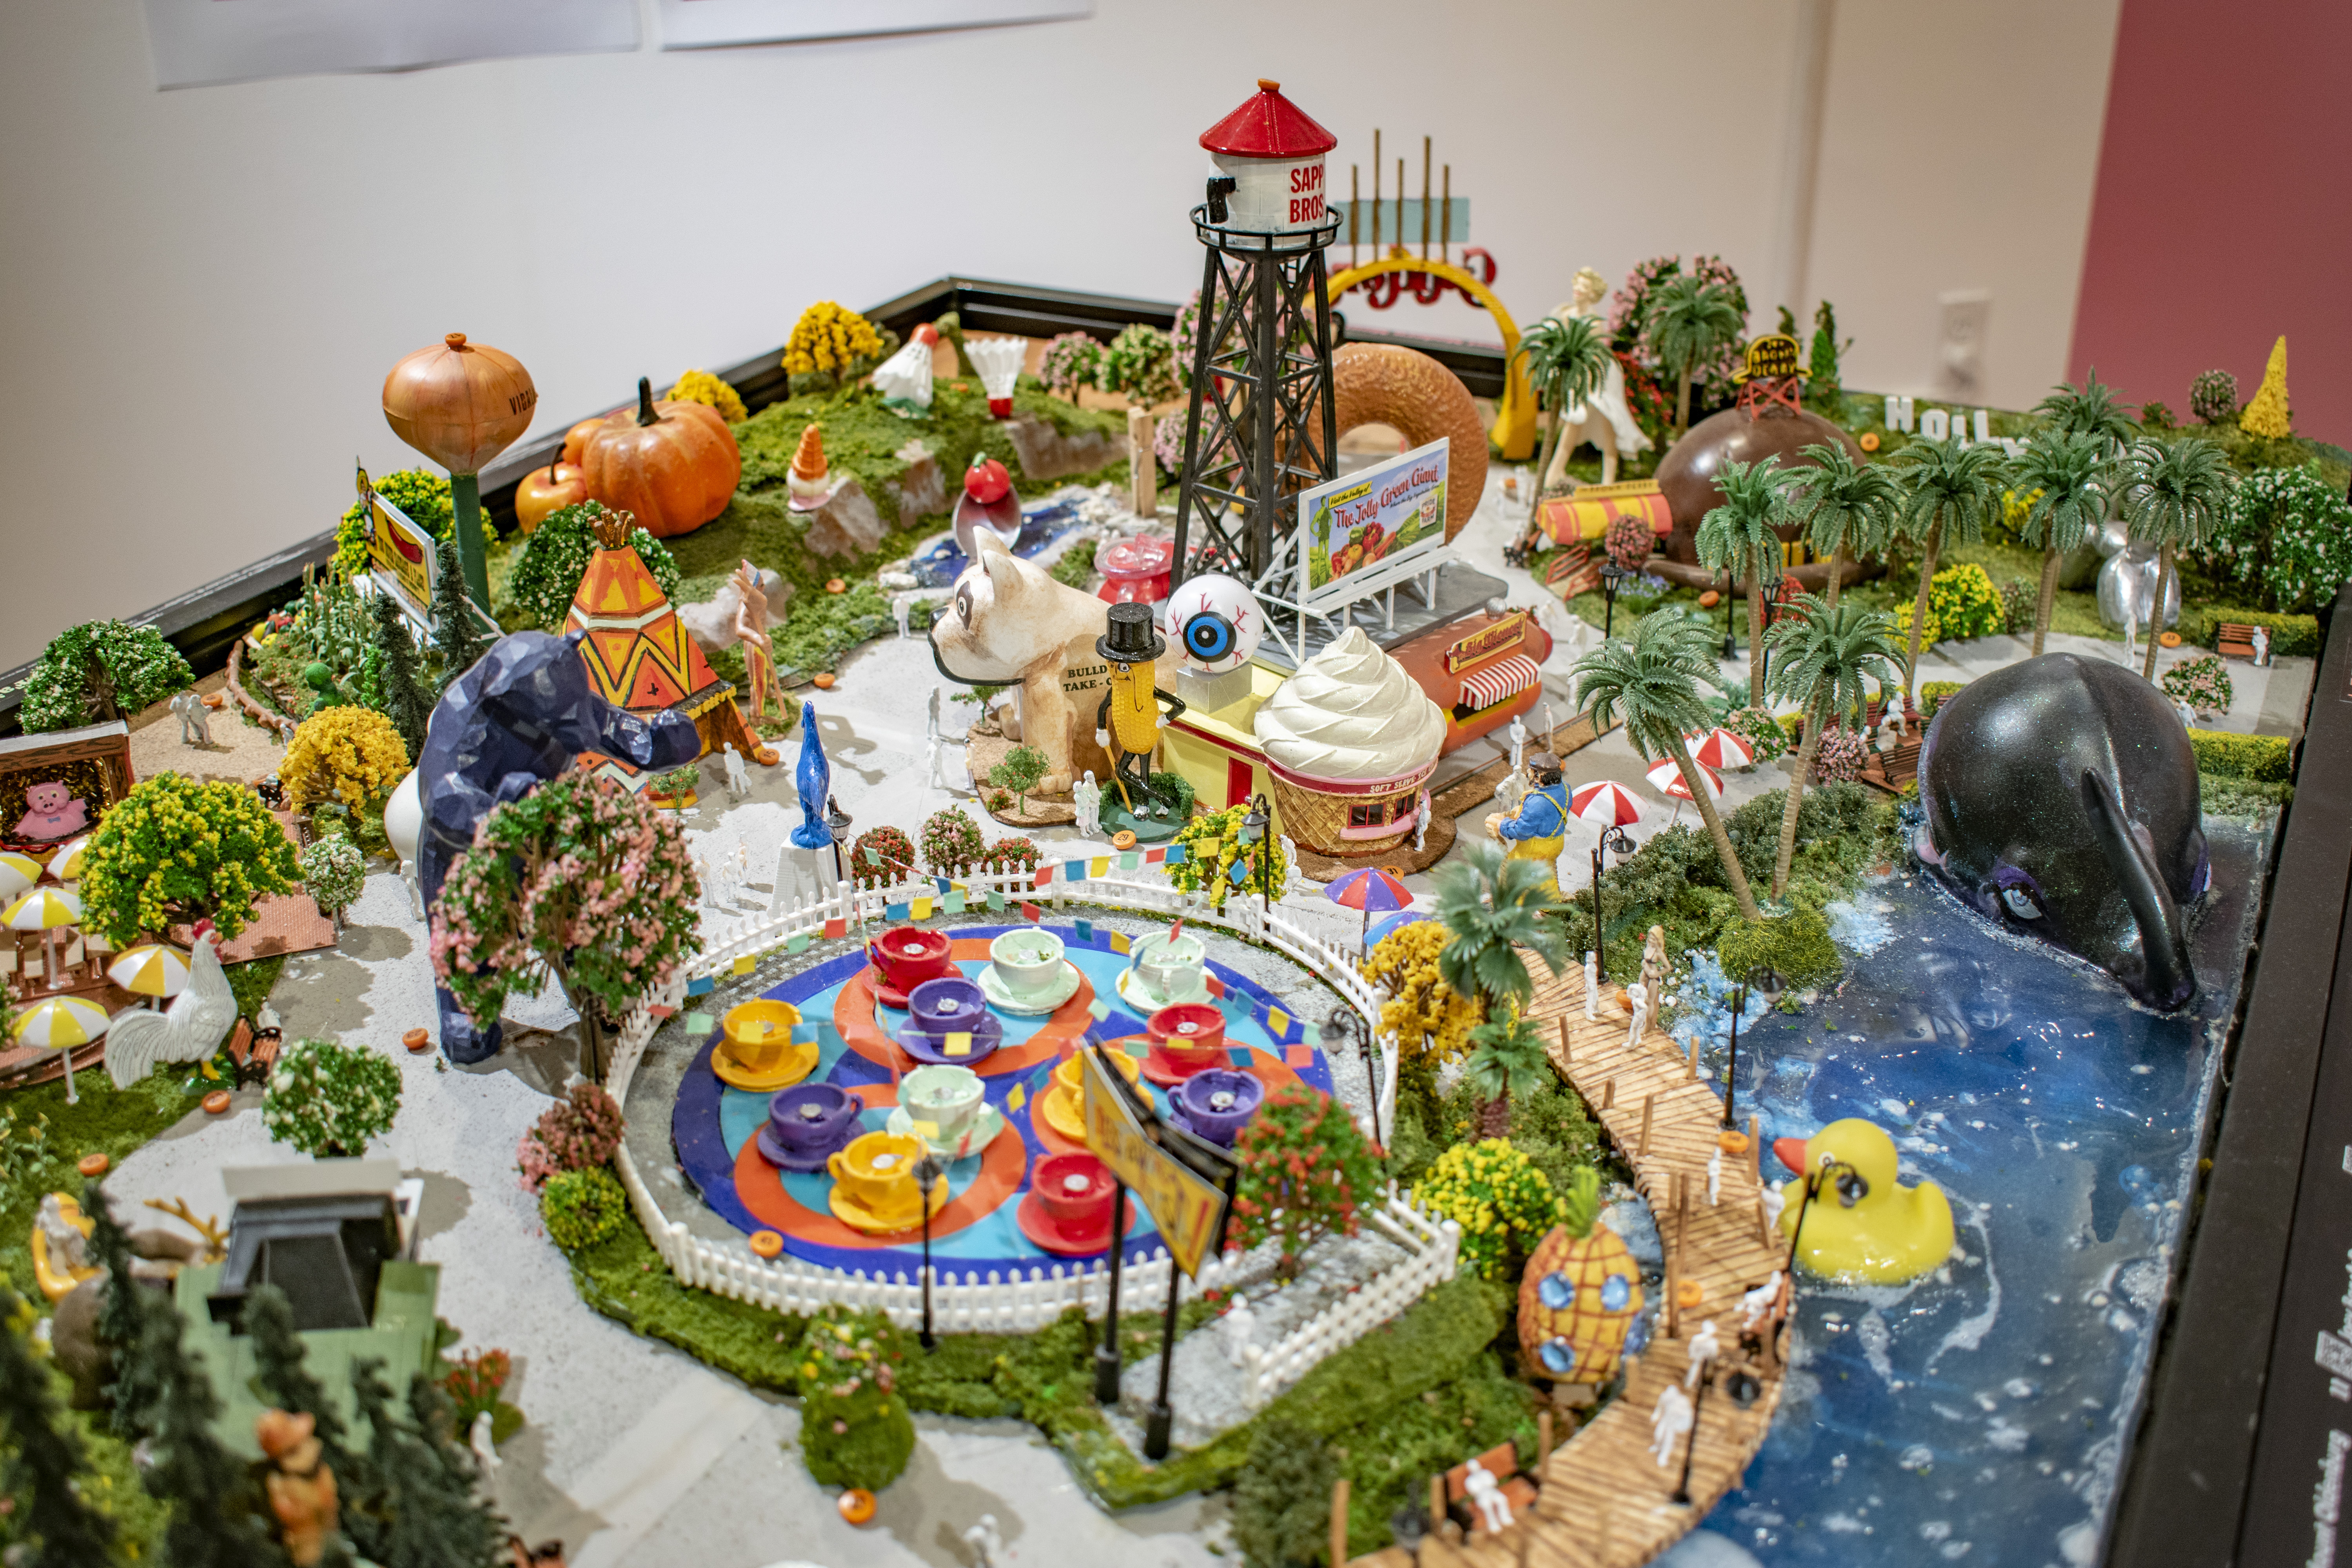 Display model of theoretical amusement park with rides, and sculptures related to Fauxtopia theme